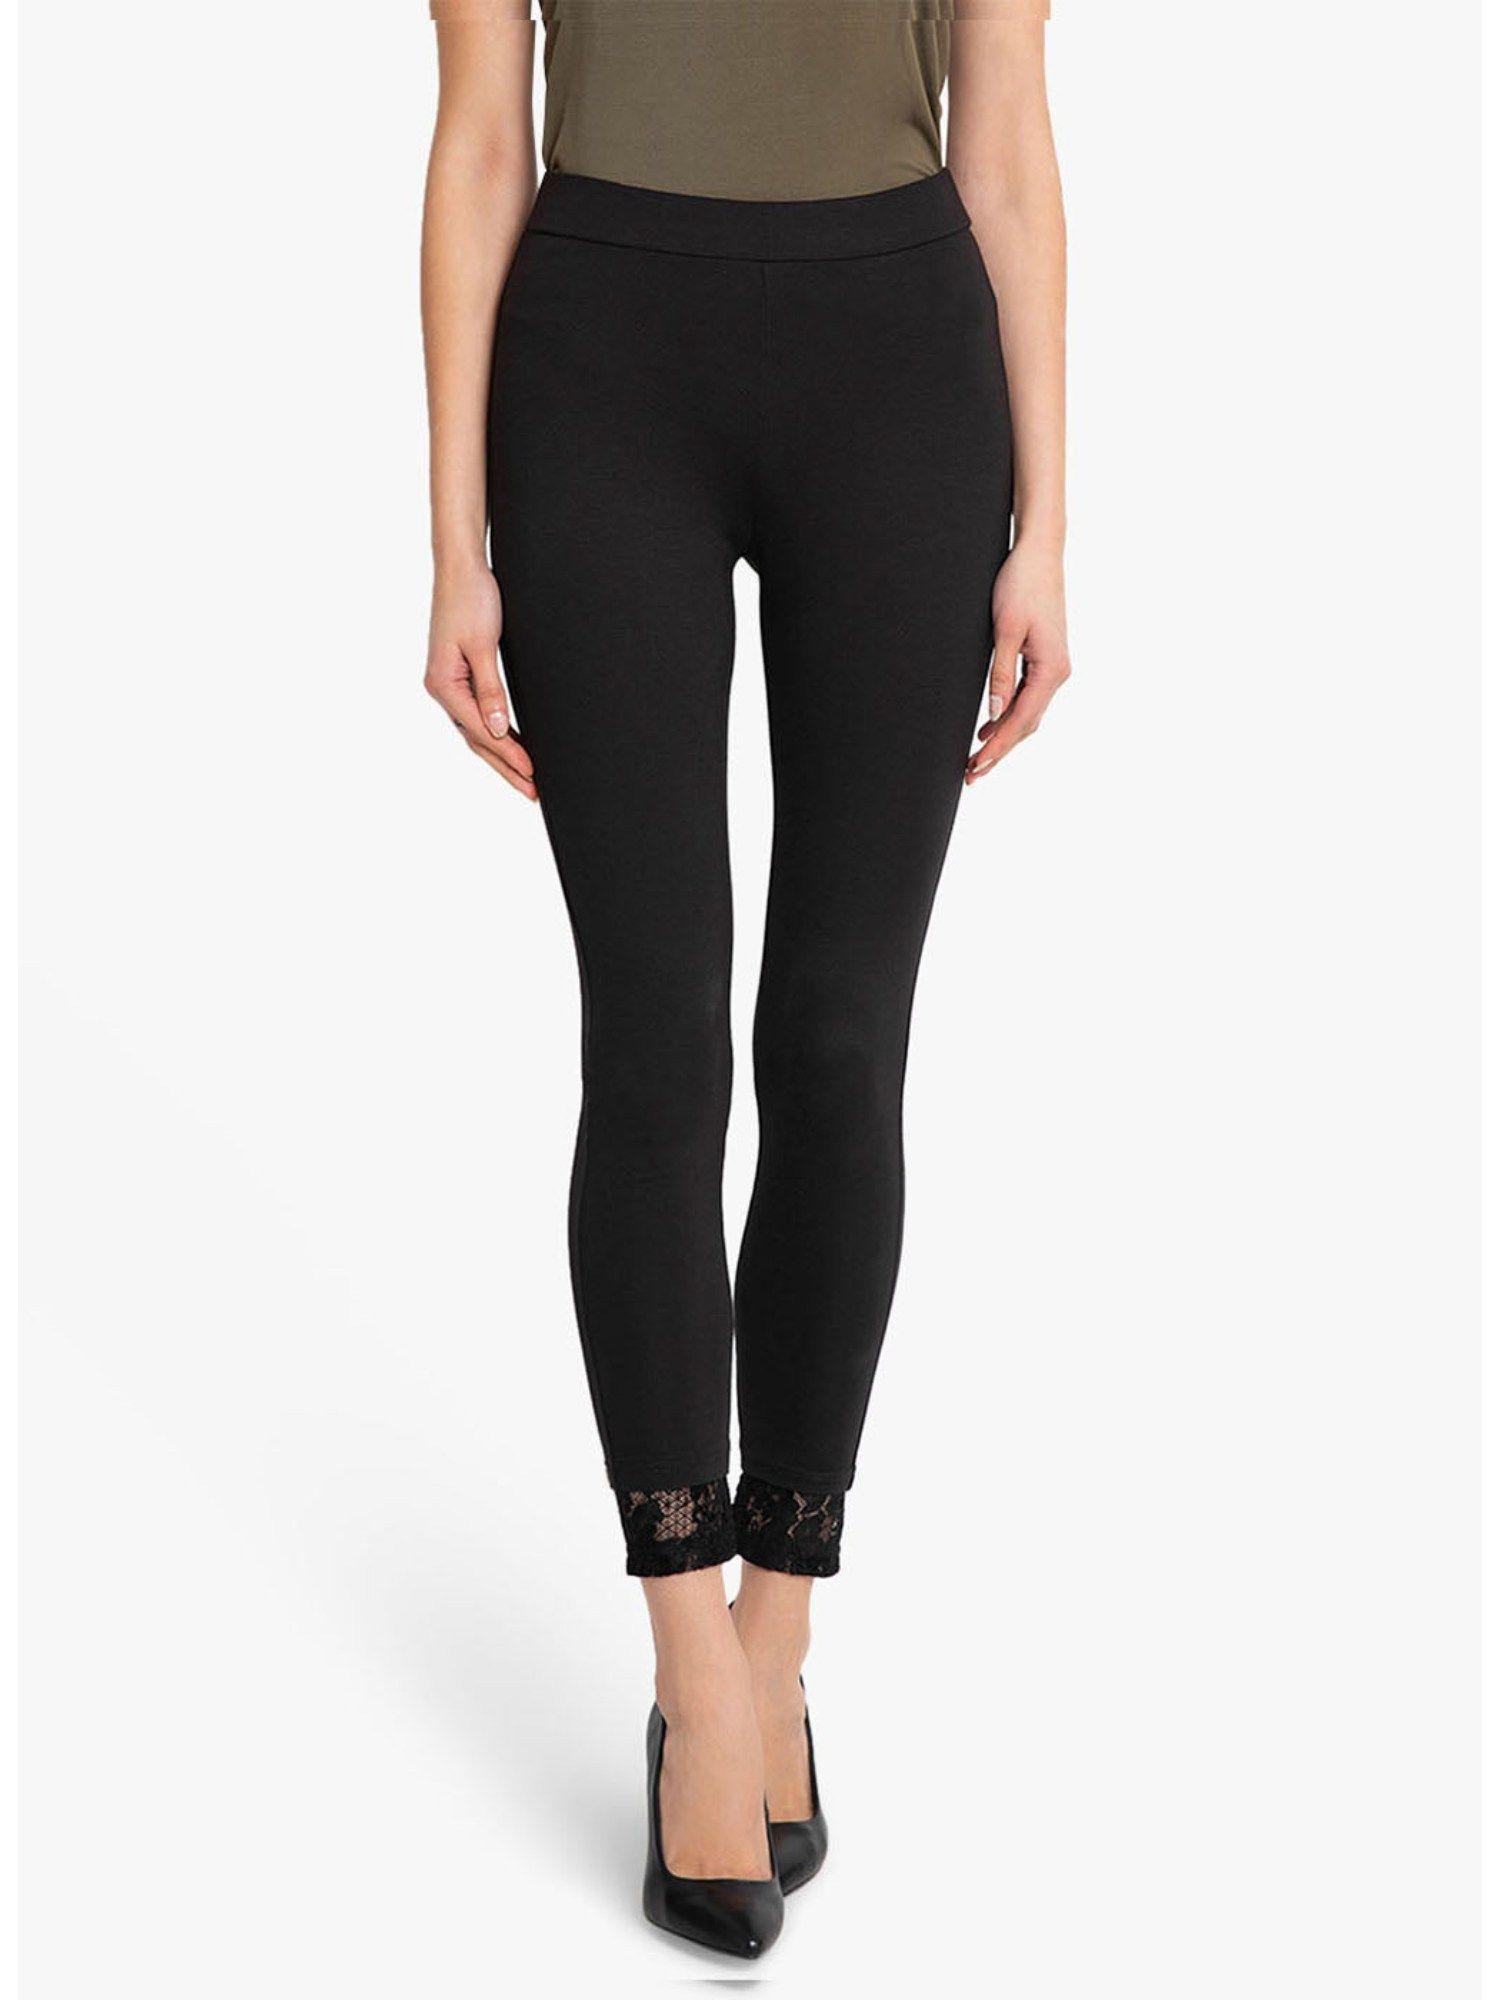 Black Skinny Jegging with Lace at The Hem